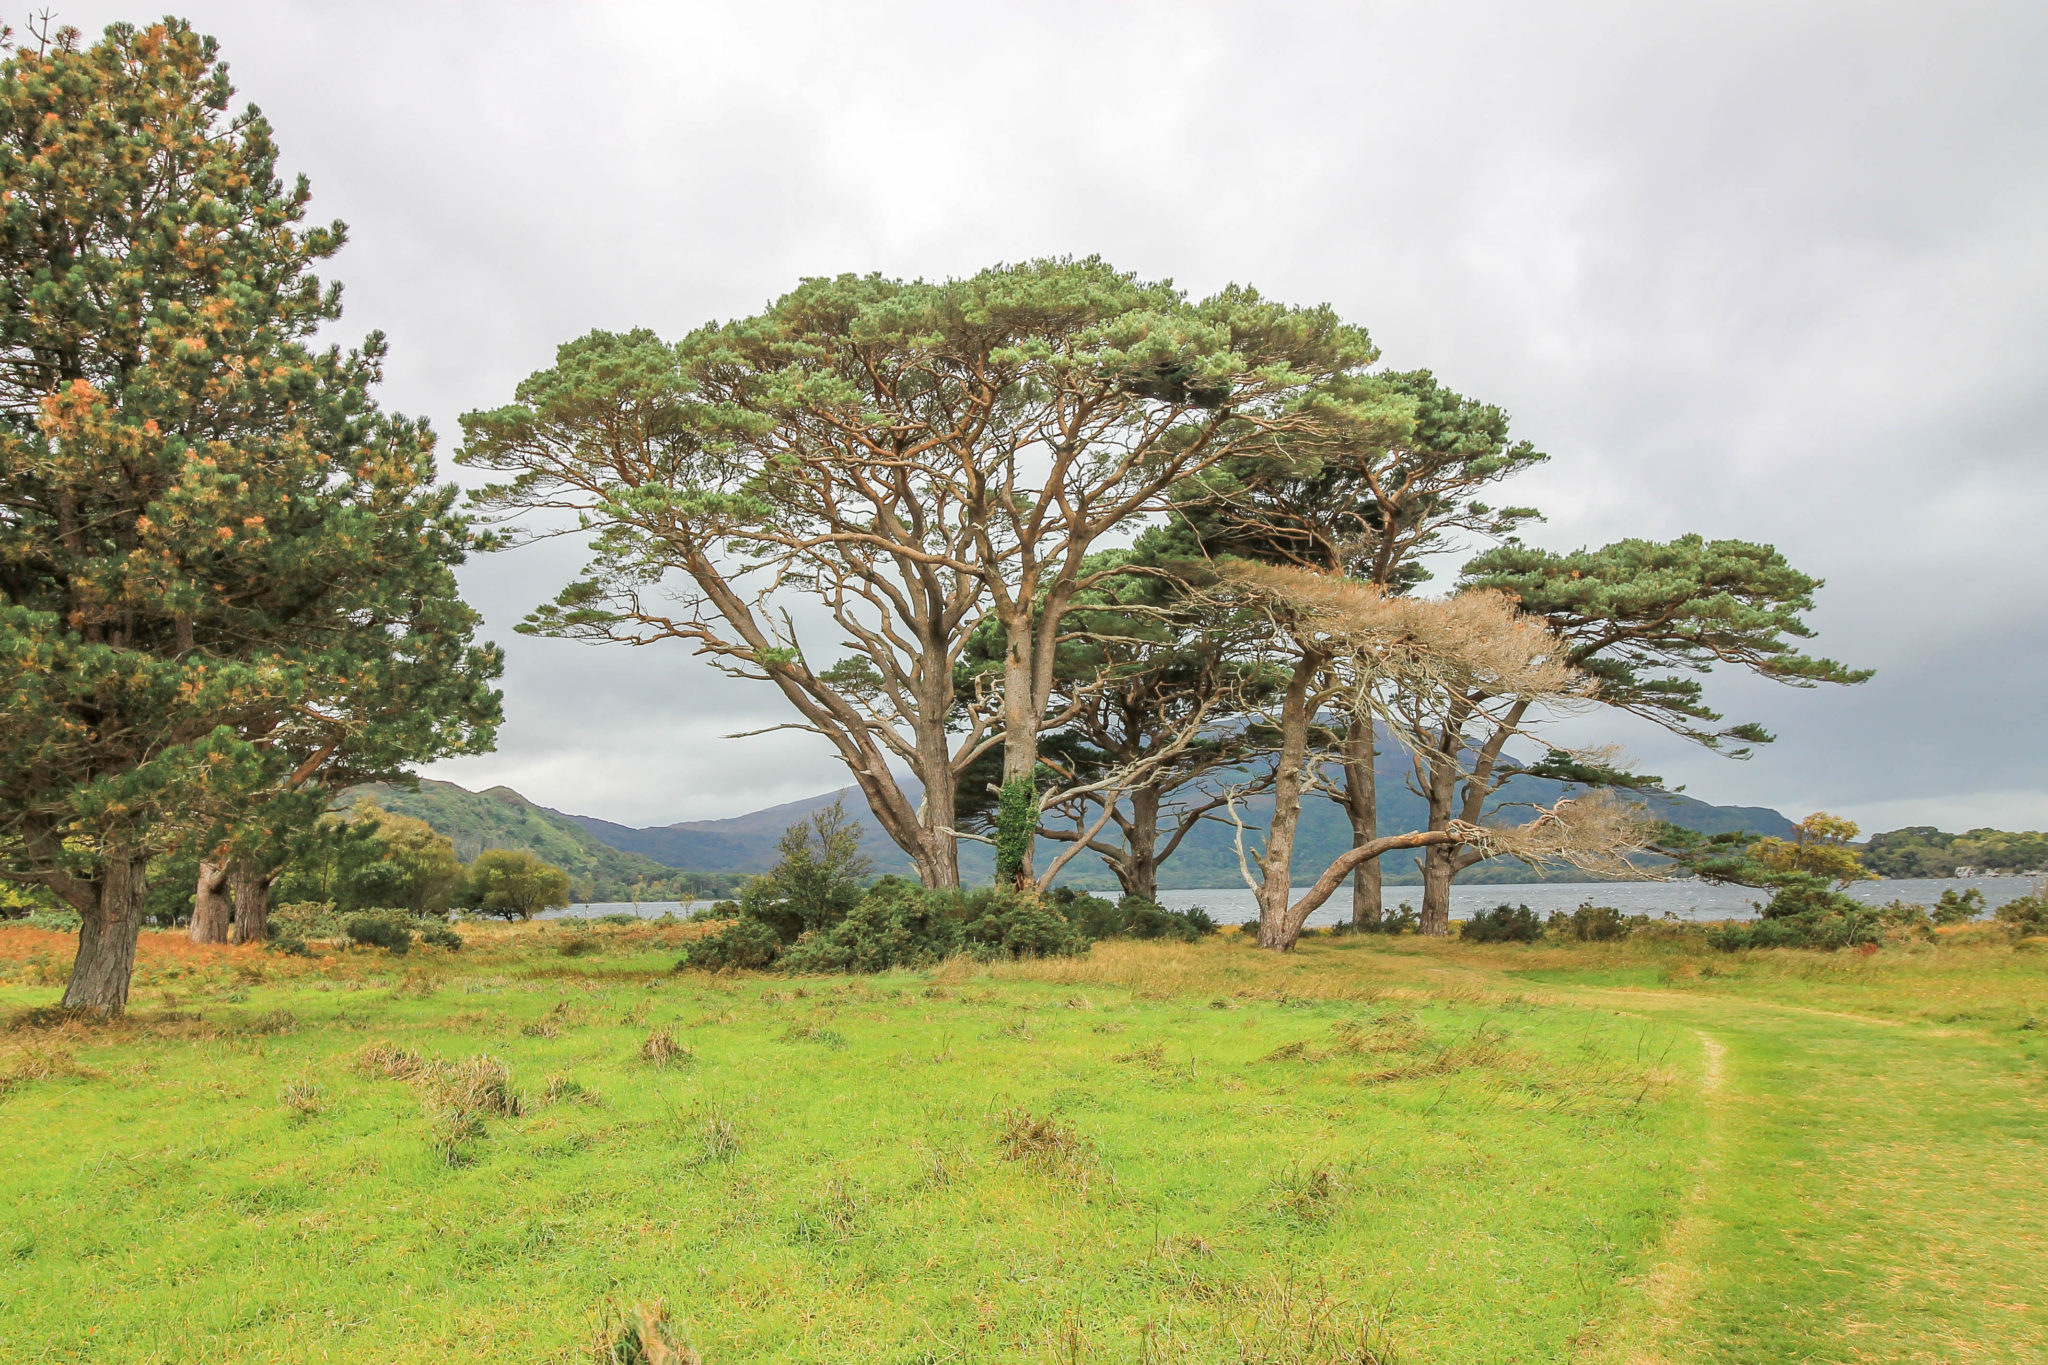 A large tree on the shores of the lake in Killarney National Park, County Kerry, Ireland